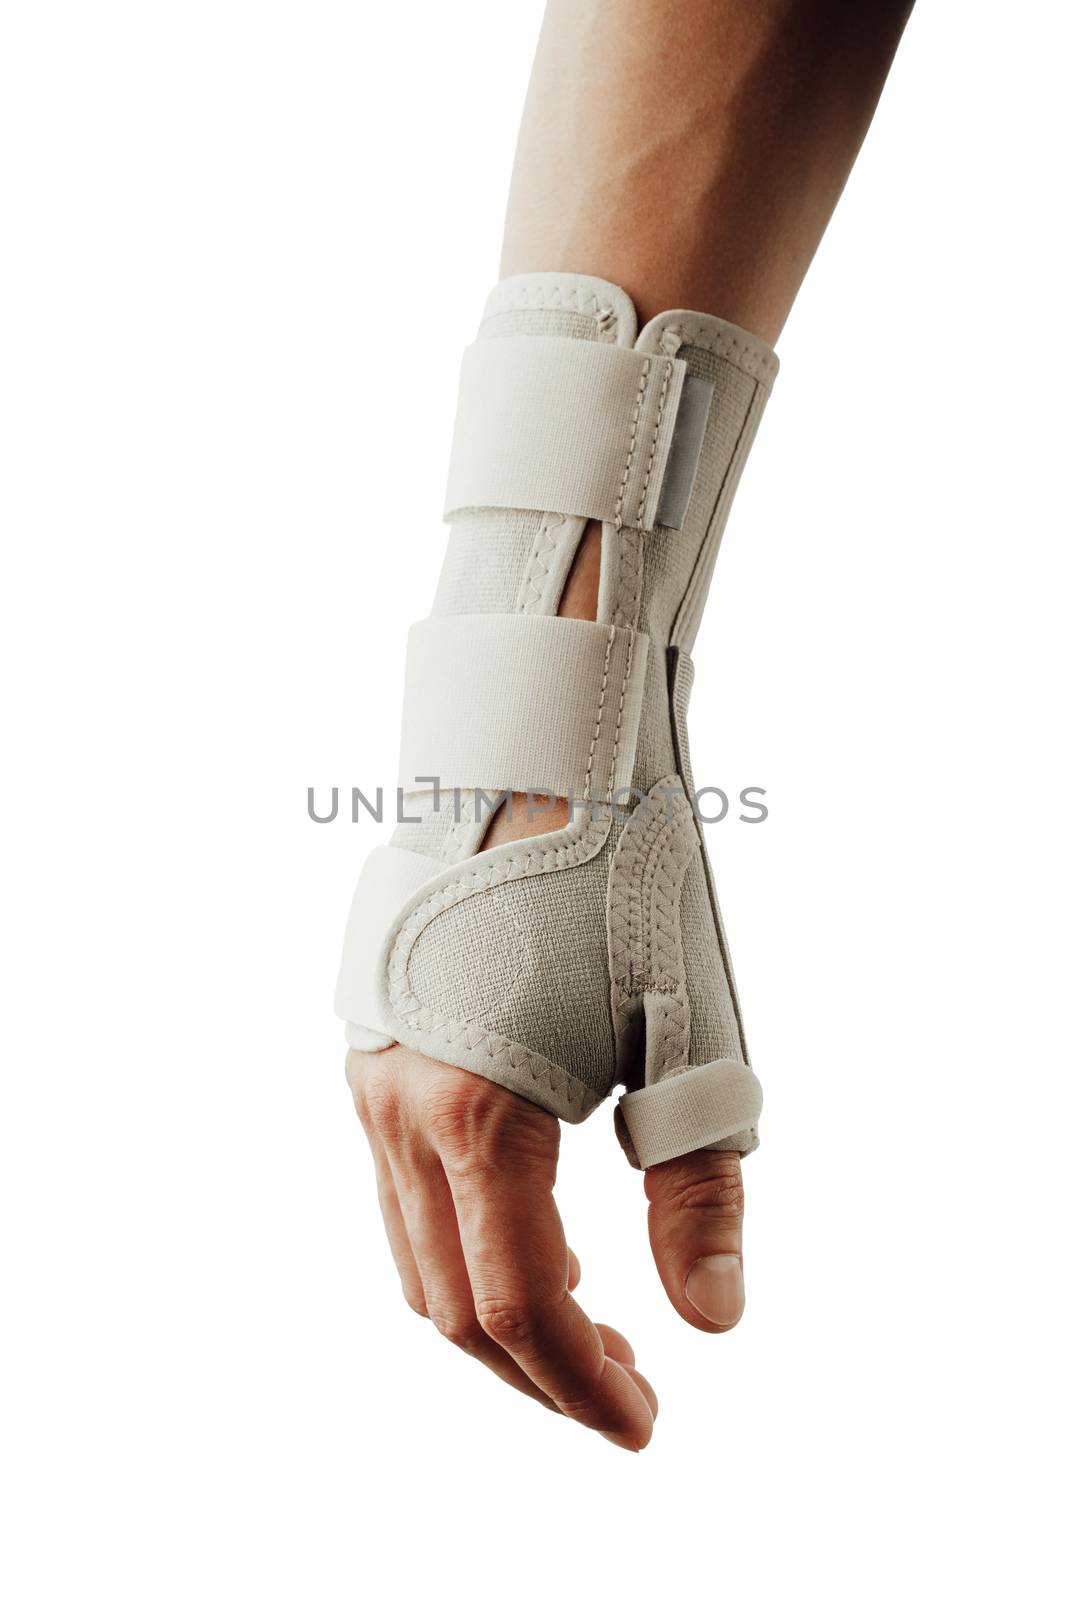 wrist and hand orthotics support for carpal tunnel syndrome healing by nikkytok